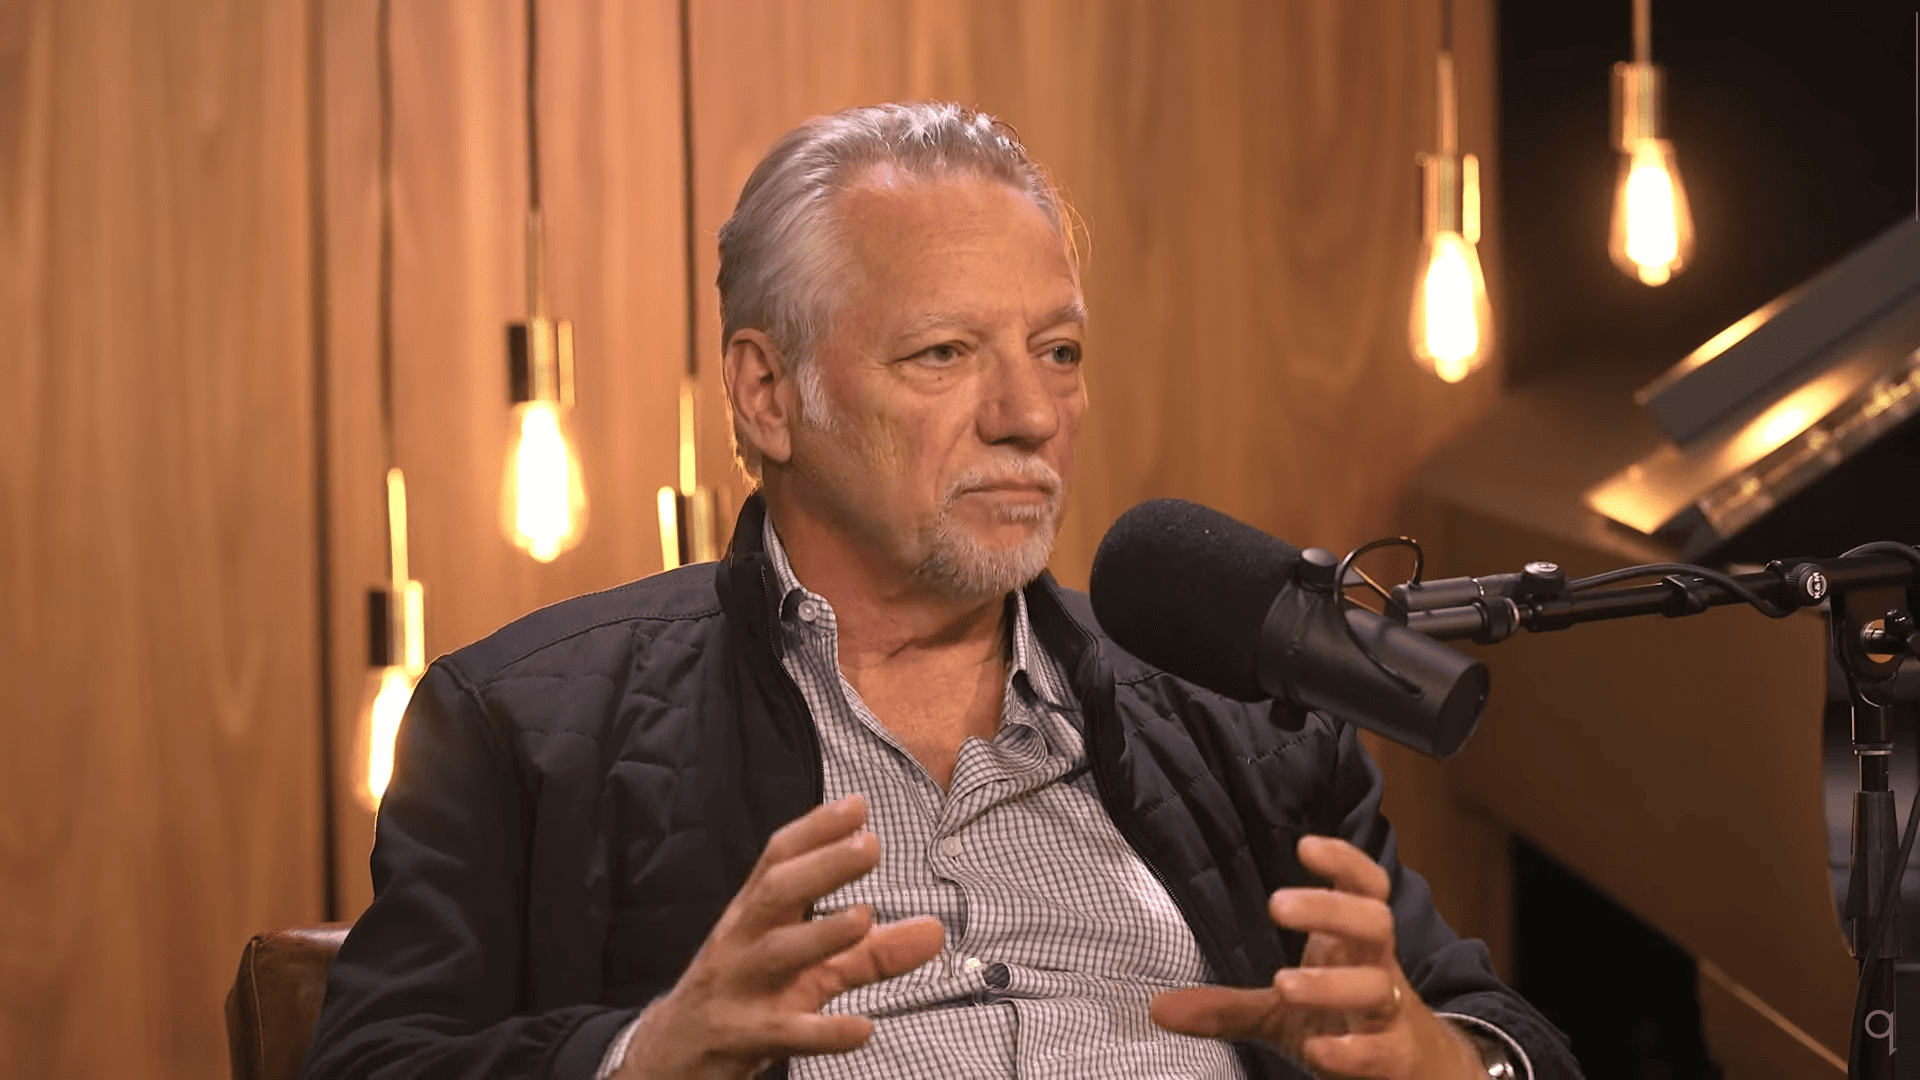 Ed Burtynsky, a light-skinned man with grey hair, giving an interview for radio.